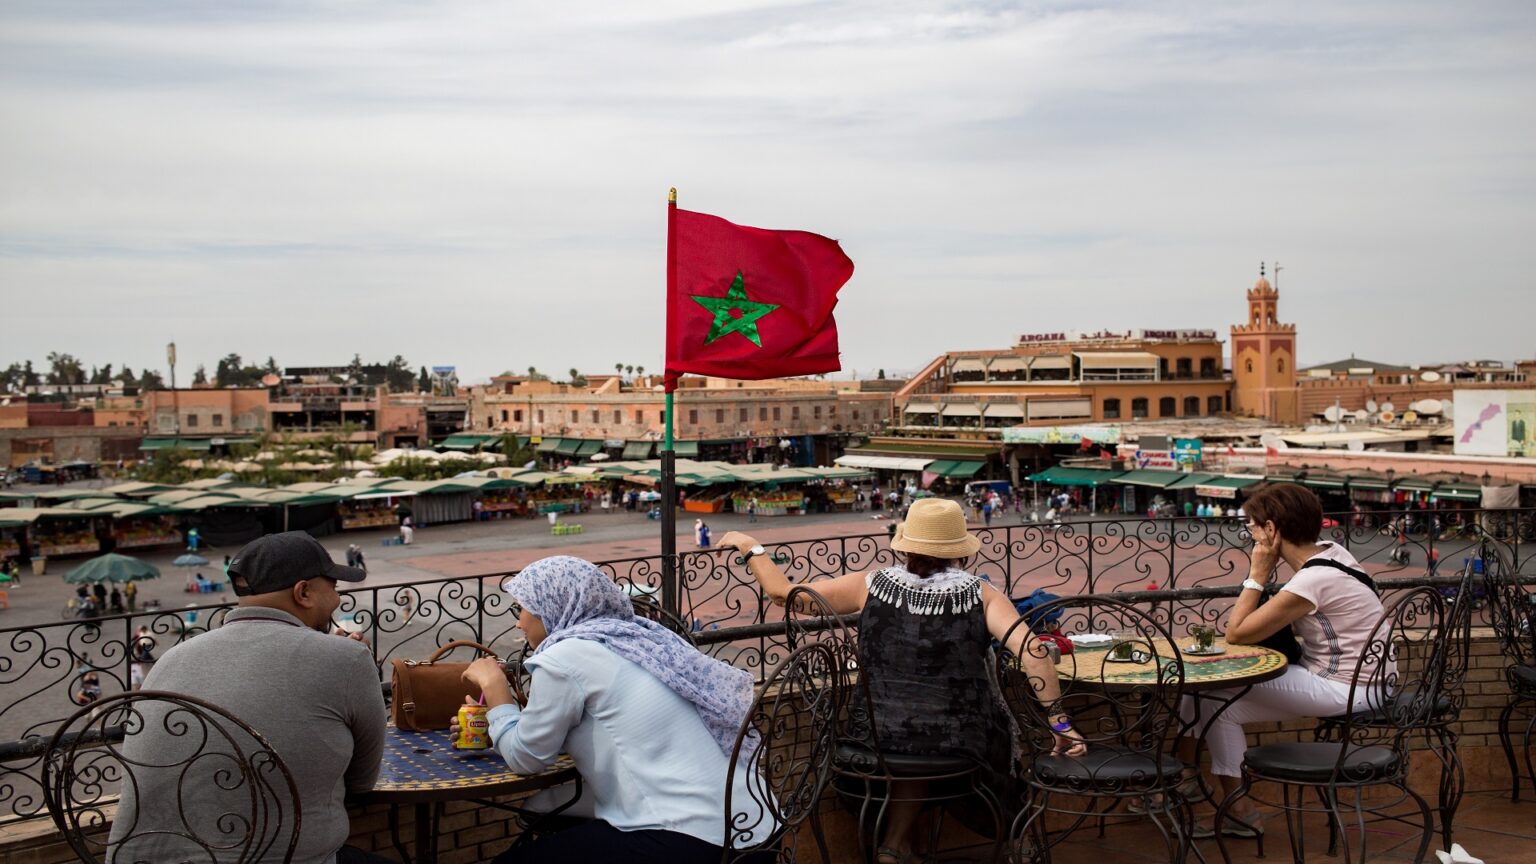 The Kingdom of Morocco expects economic growth by 4.6% this year, after an economic contraction of 7% last year.